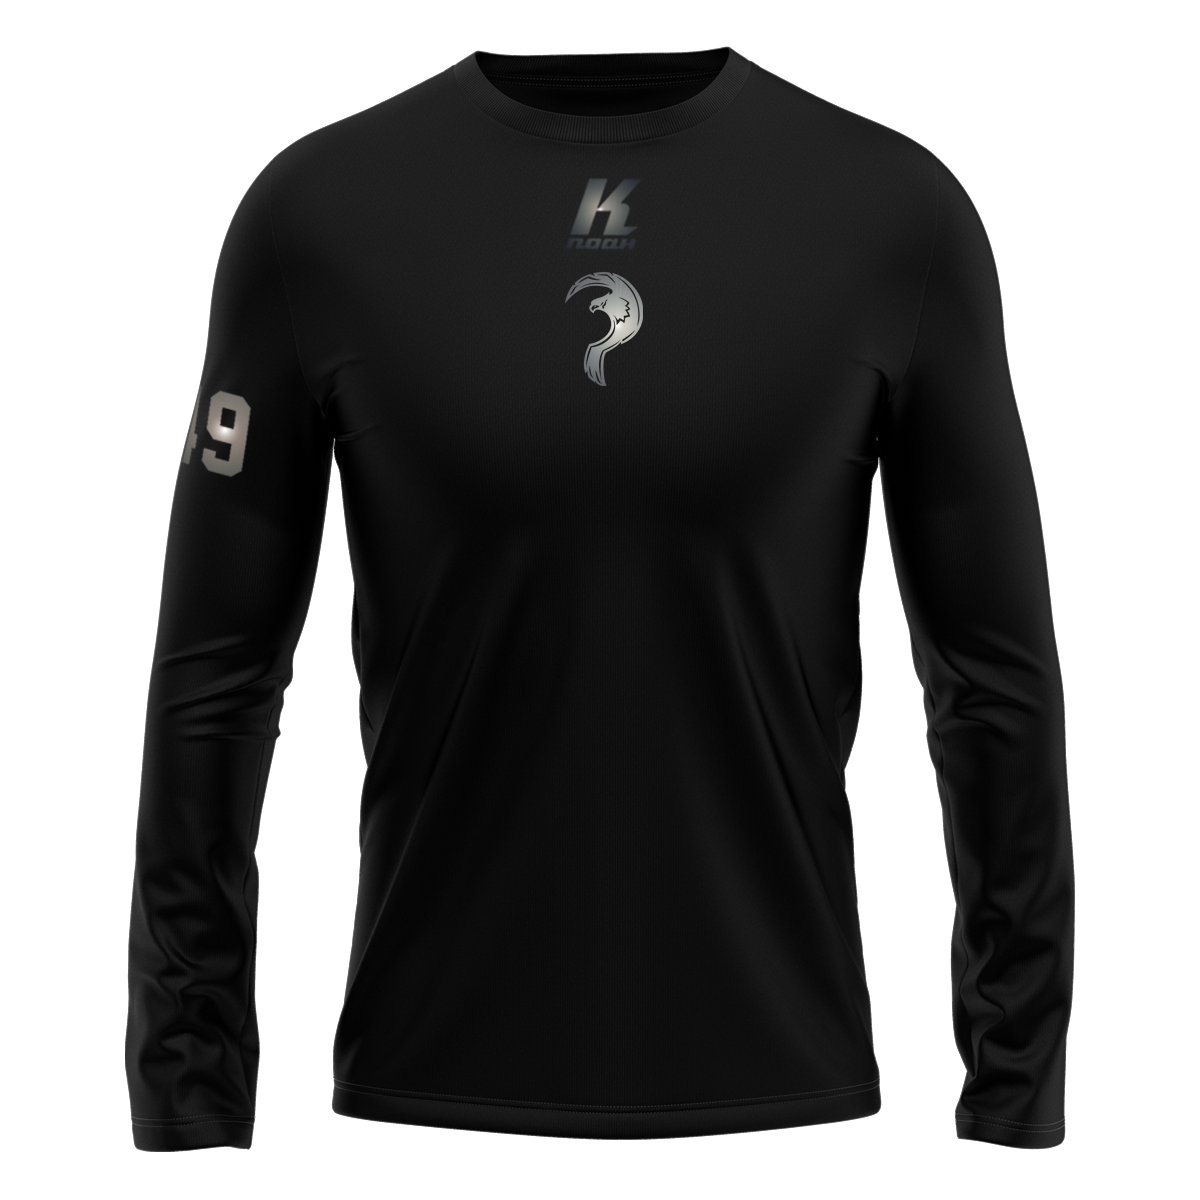 Patriots "Blackline" K.Tech Longsleeve Tee L02071 with Playernumber/Initials